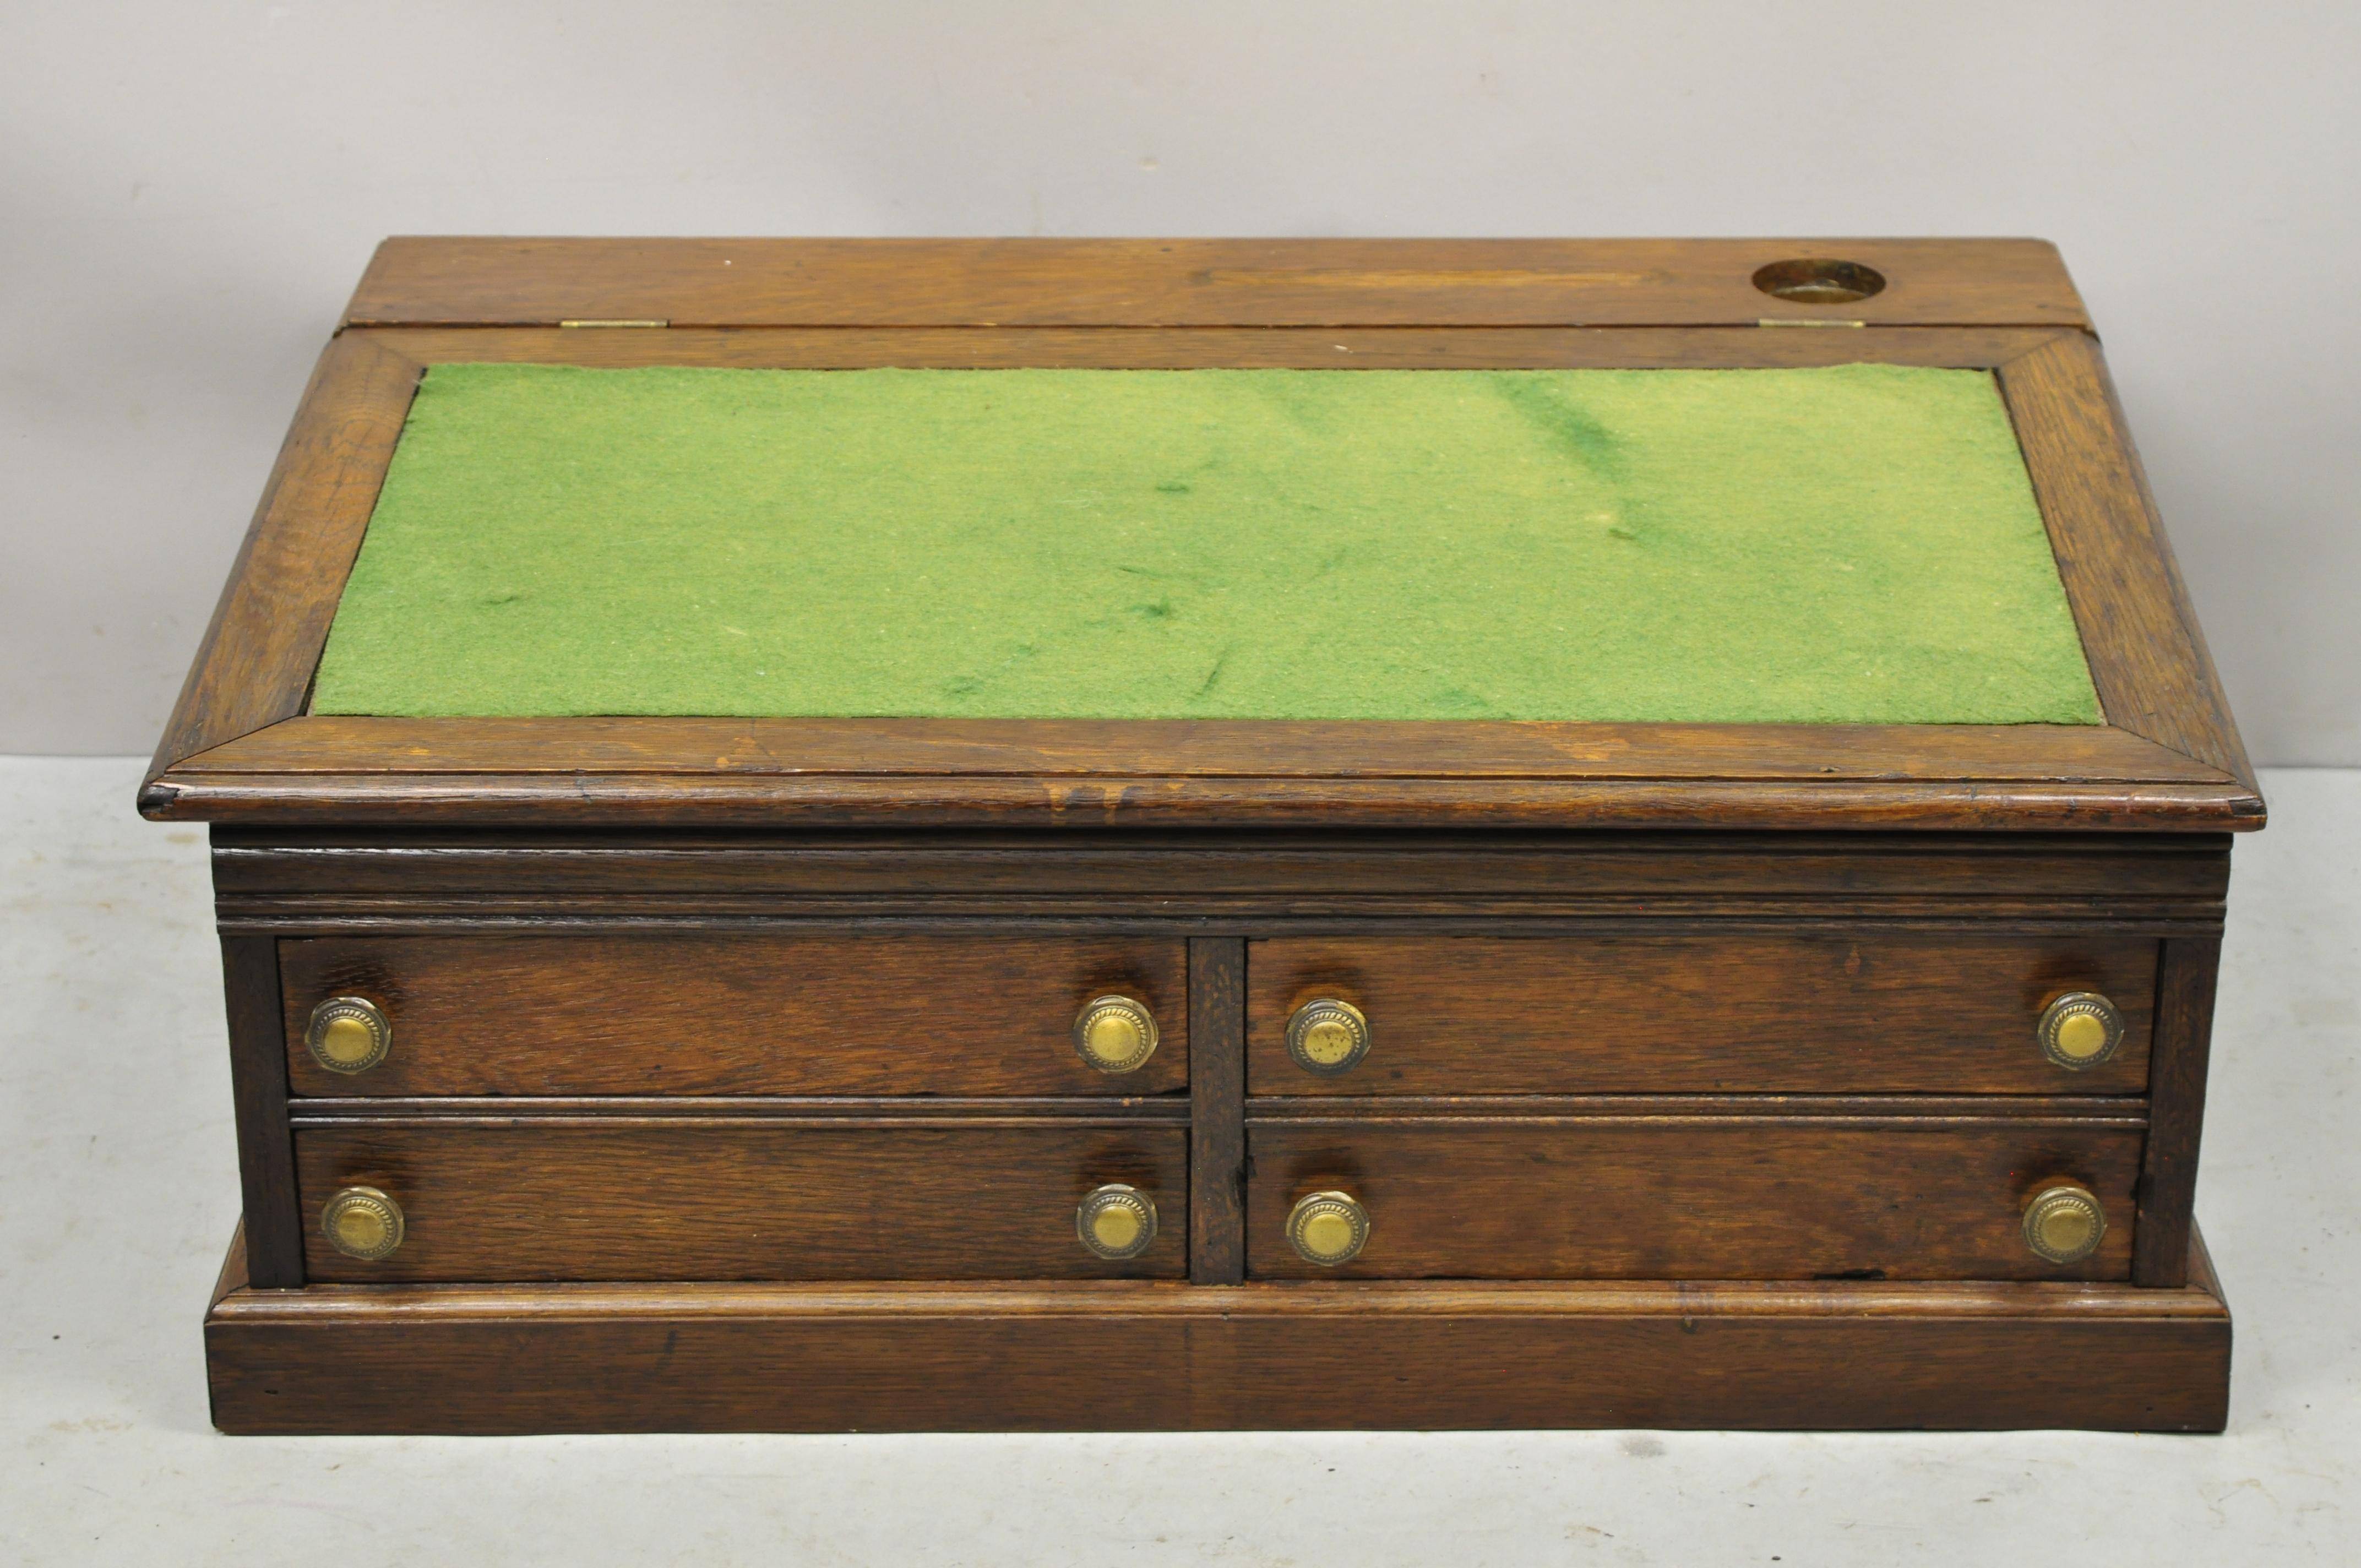 Antique Mission Oak Arts & Crafts 4 drawer spool thread cabinet writing lap desk. Item features 4 dovetailed drawers, green felt top, lift lid, beautiful wood grain, brass pulls, very nice antique item. Circa 19th Century. Measurements: 12